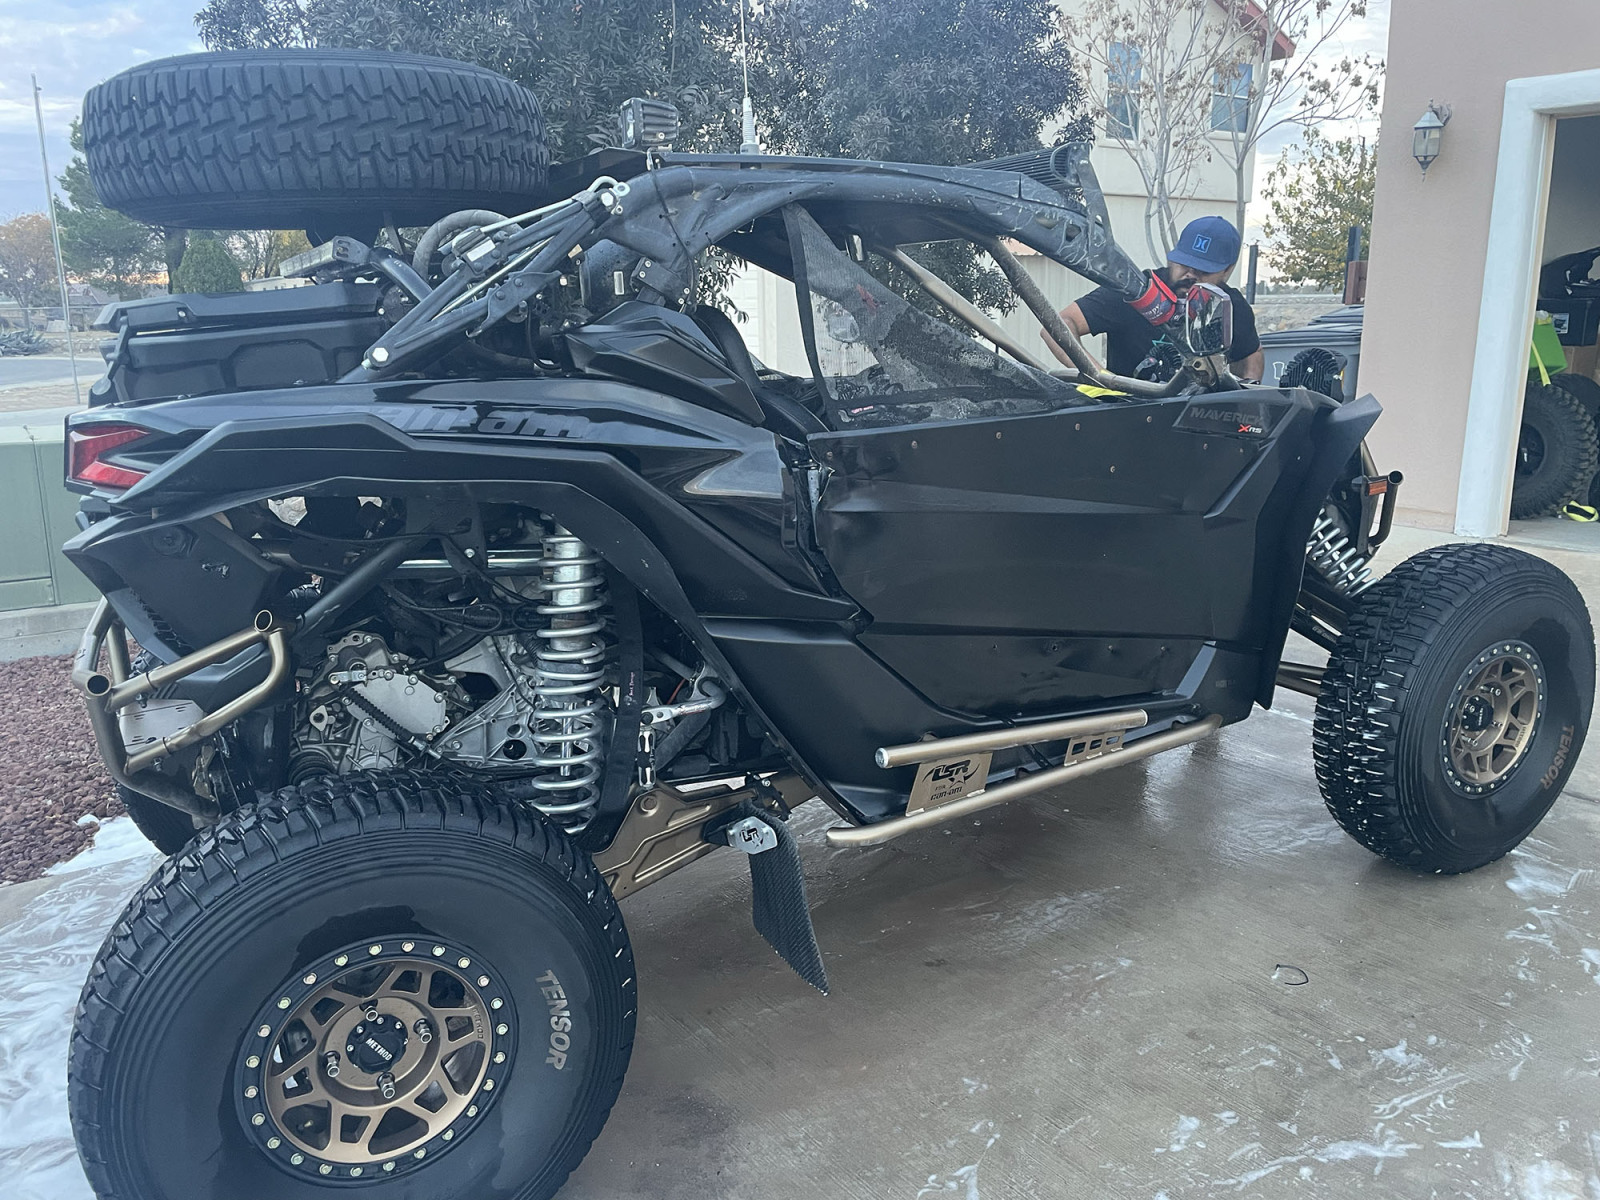 For Sale: 2019 can am maverick x3 turbo R with over 40k in upgrades - photo0